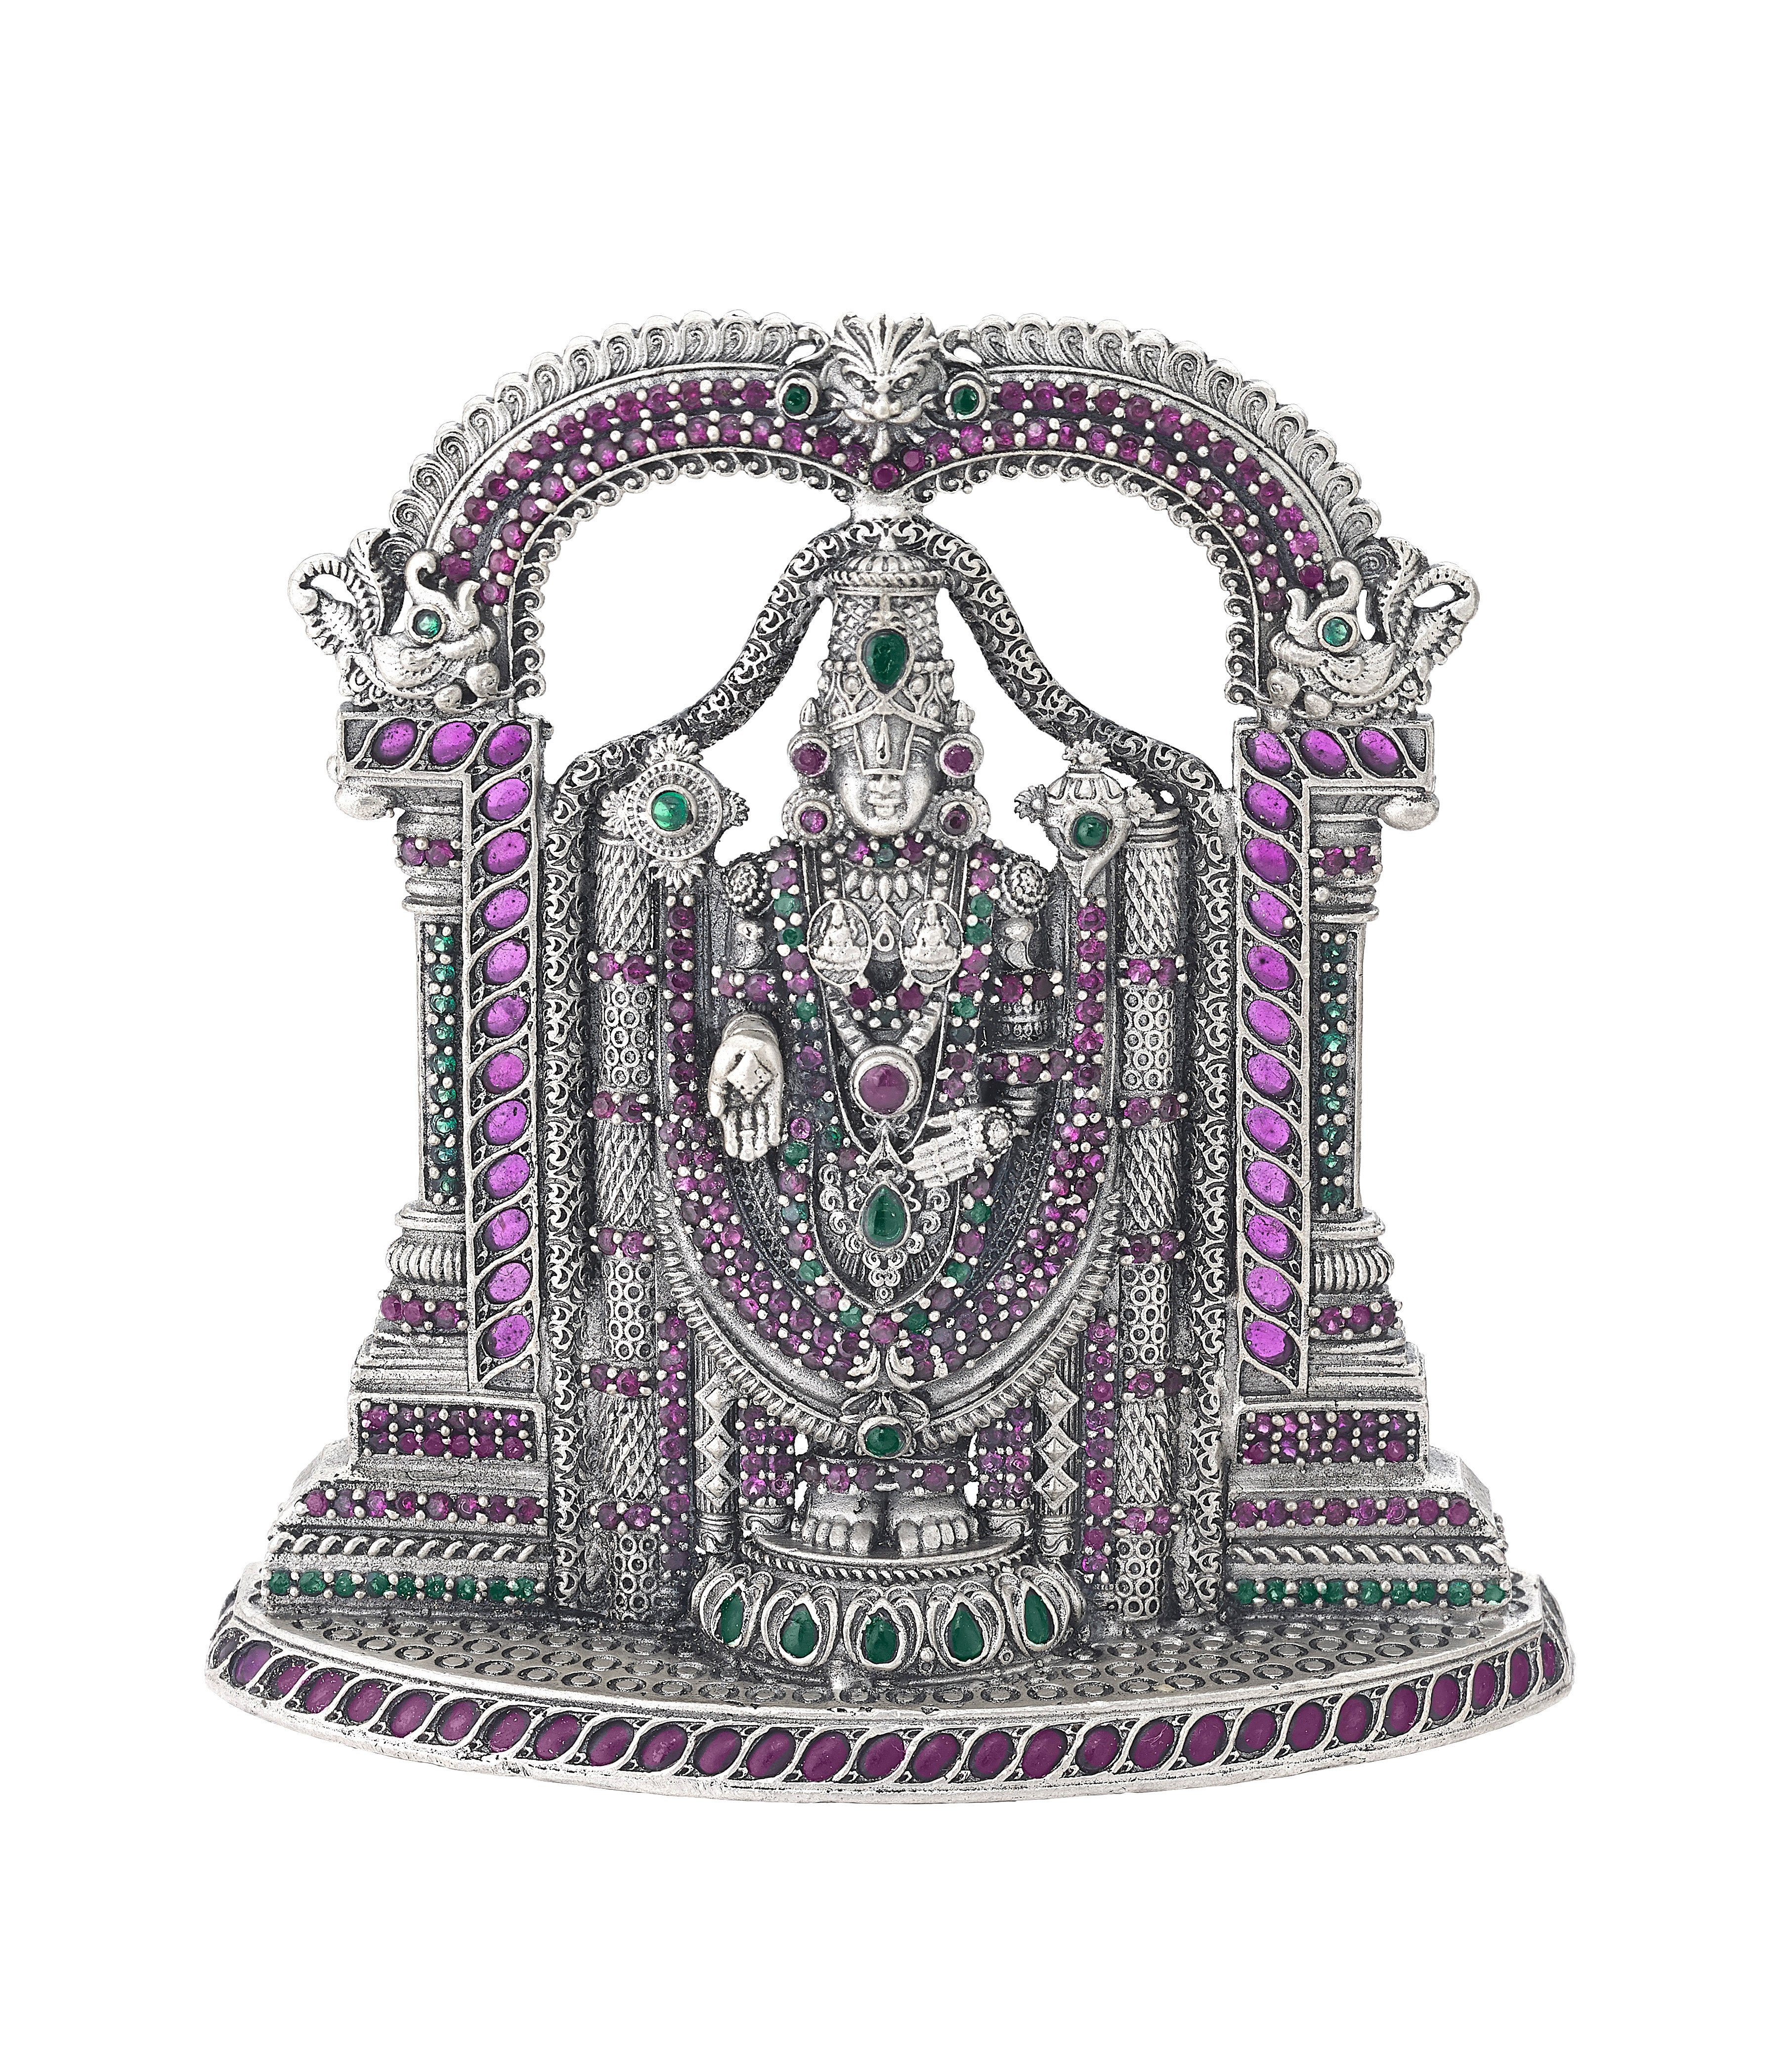 Handcrafted Majesty: Sterling Silver Lord Balaji Statue